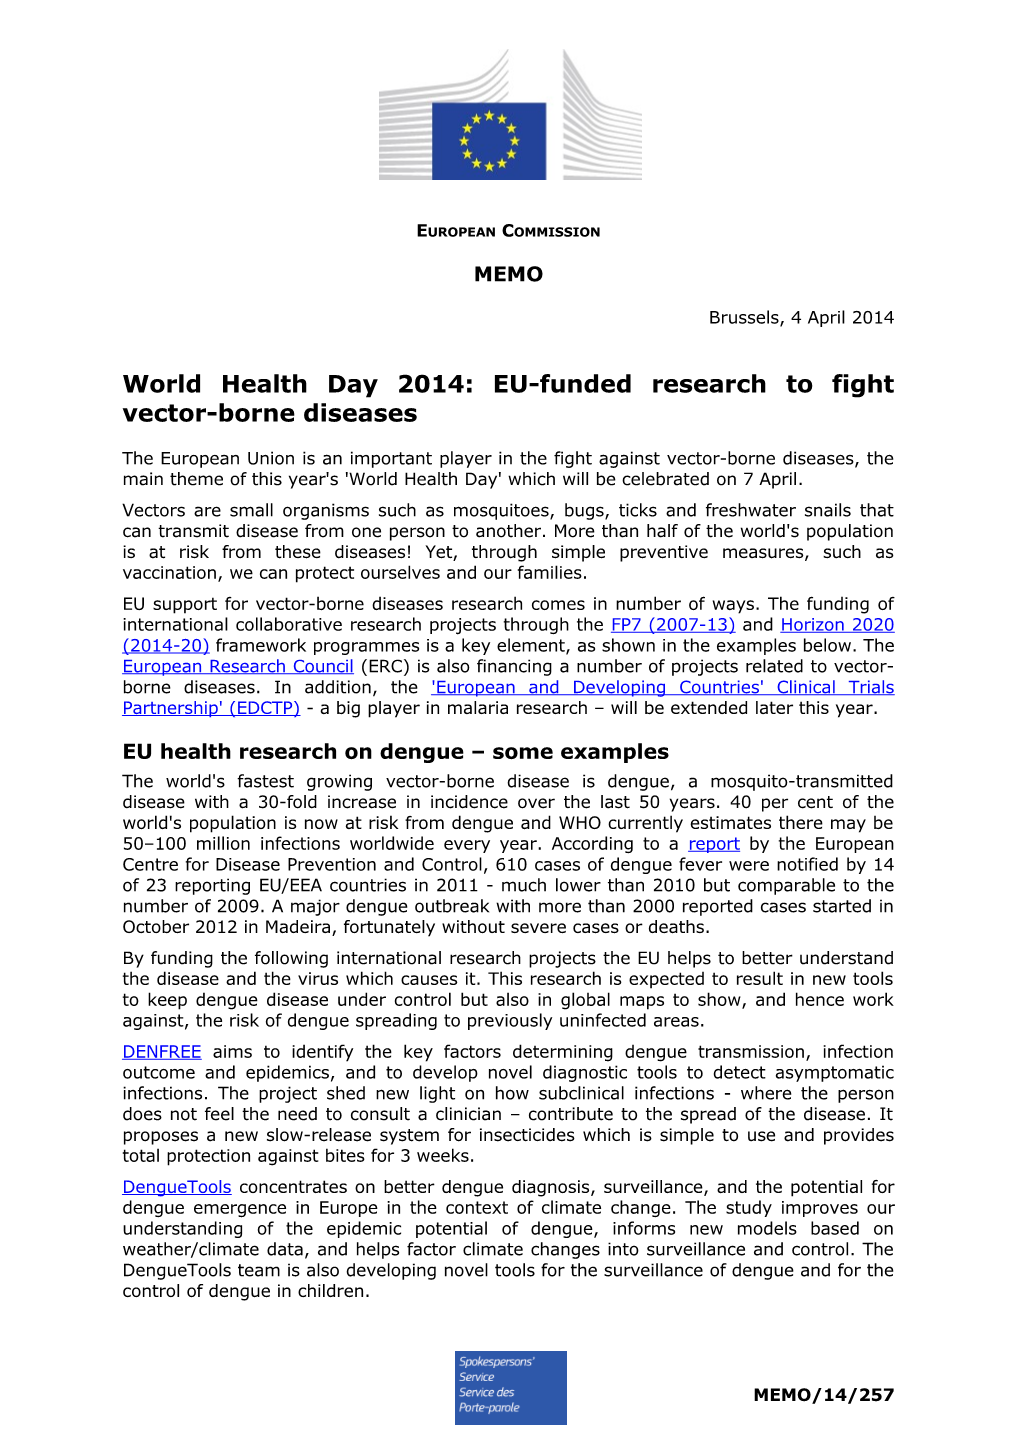 World Health Day 2014: EU-Funded Research to Fight Vector-Borne Diseases